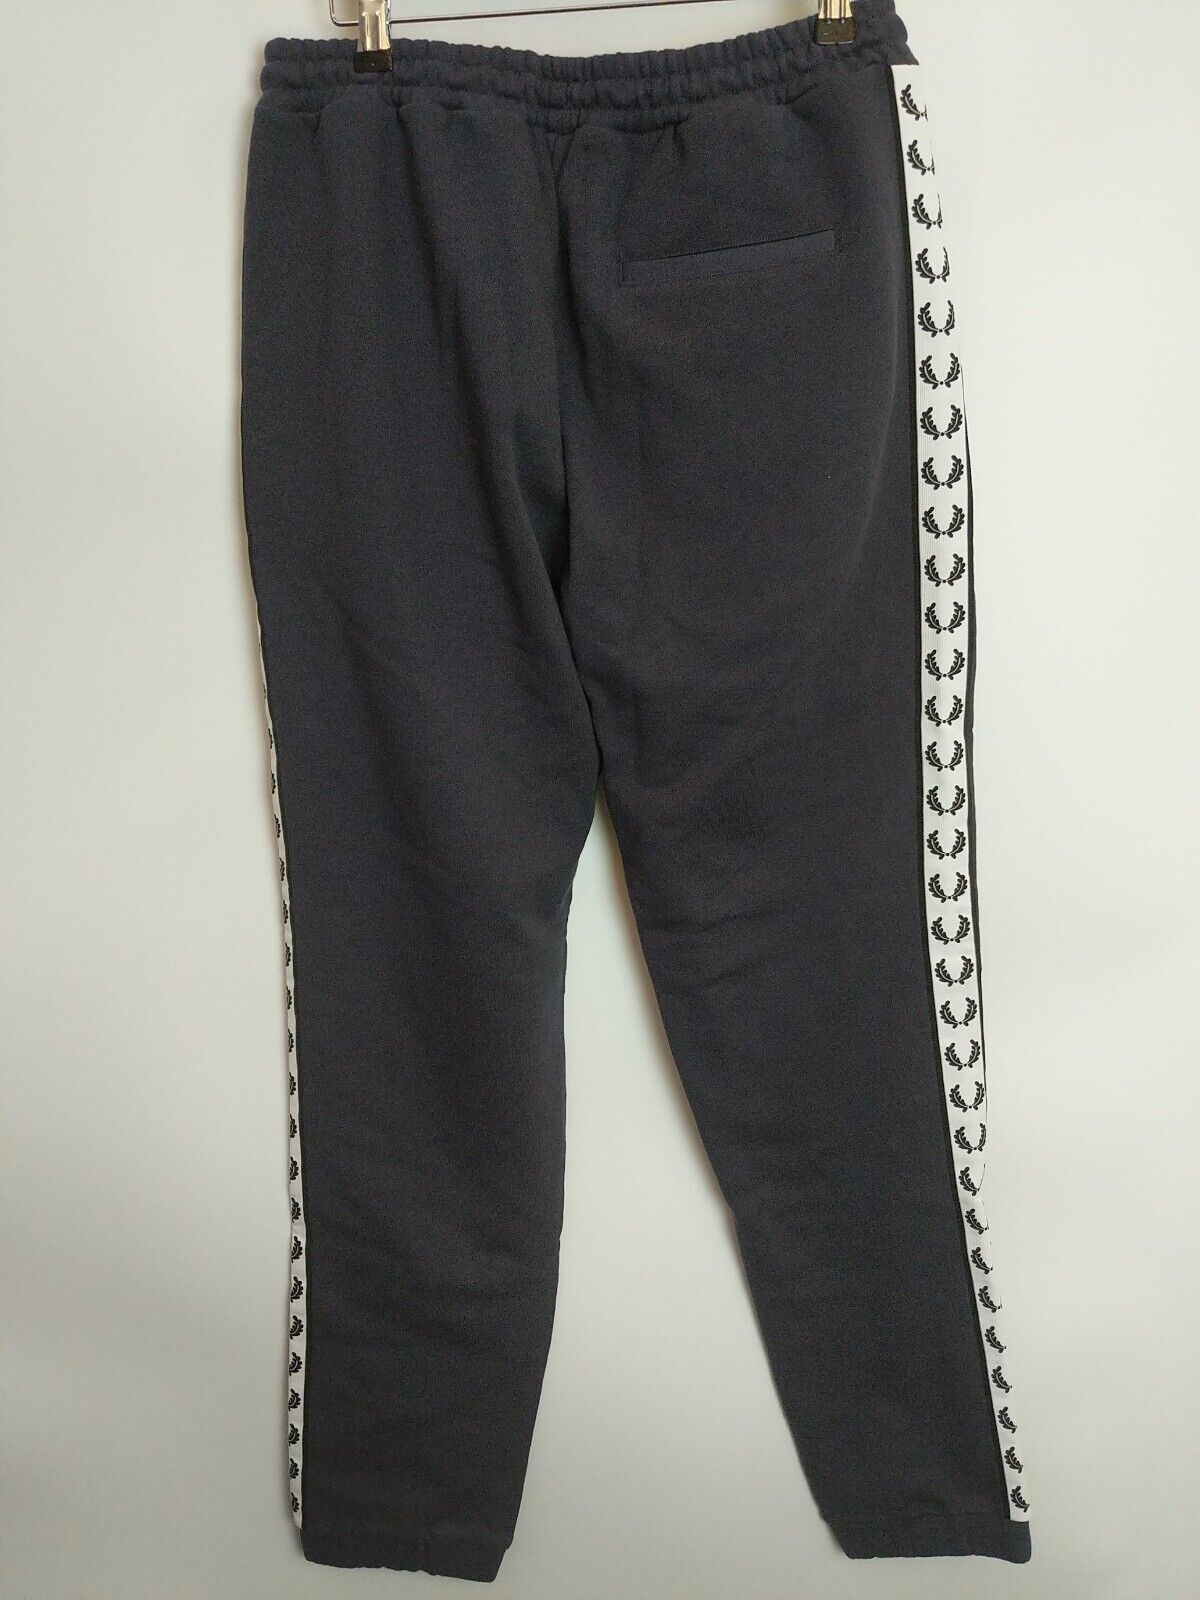 Fred Perry Navy Taped Joggers Size UK 10 **** V32